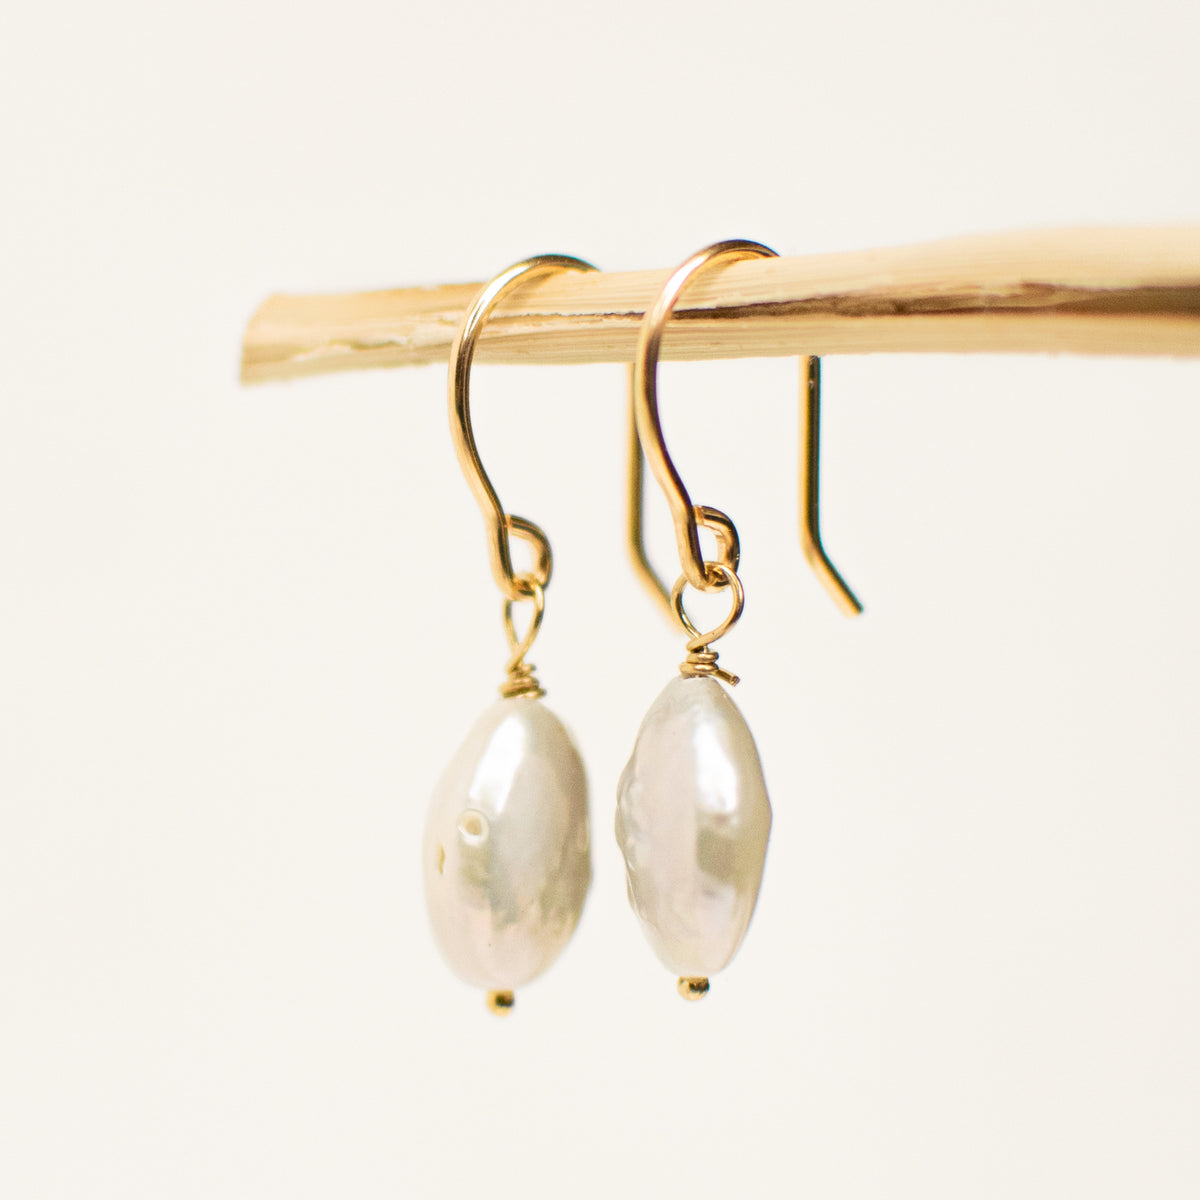 Two gold filled pearl drops hanging from a wooden stick.